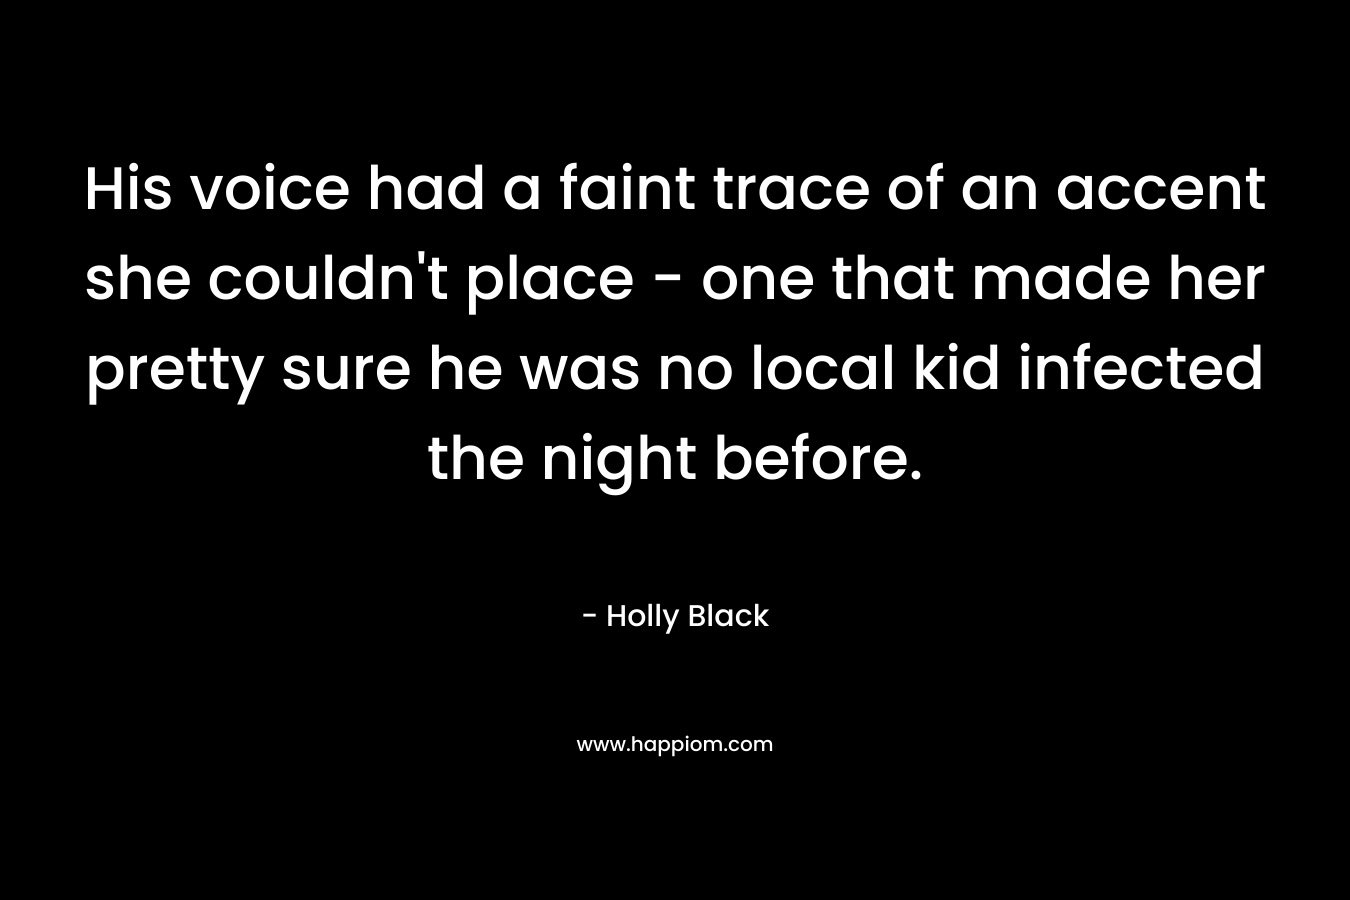 His voice had a faint trace of an accent she couldn’t place – one that made her pretty sure he was no local kid infected the night before. – Holly Black